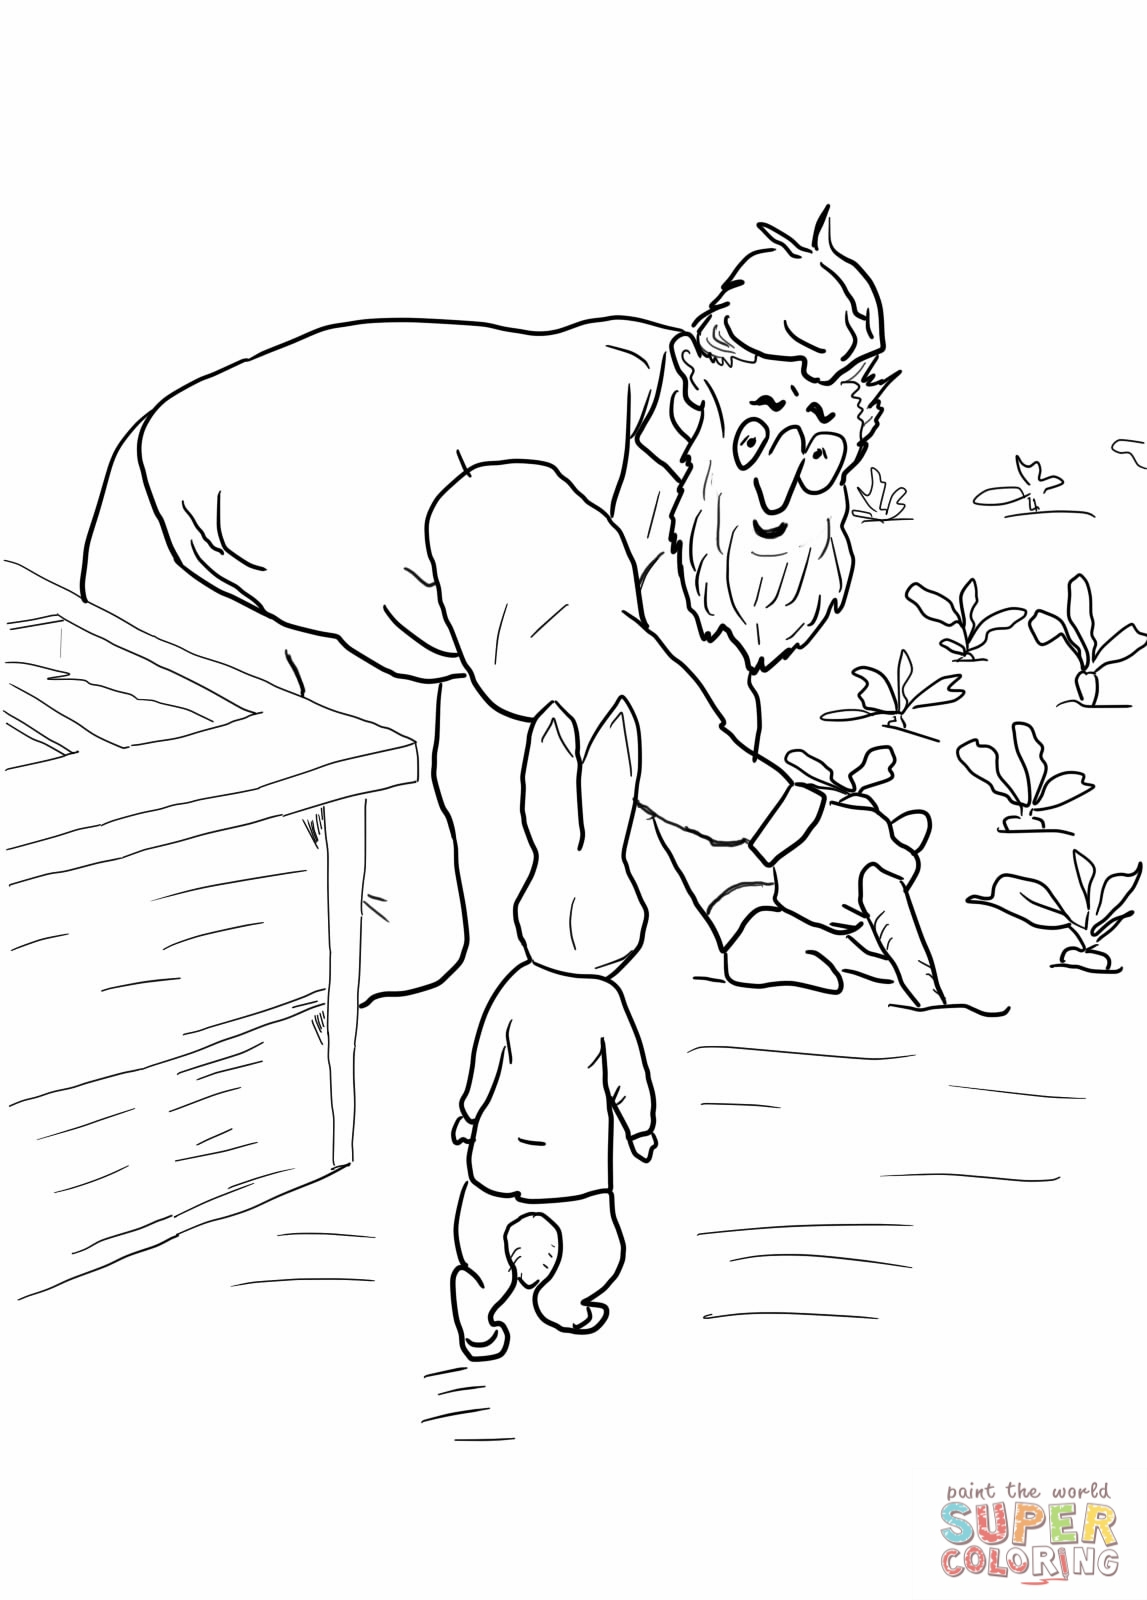 Free Printable Peter Rabbit Coloring Pages Coloring Ideas Peter Rabbit Coloring Pages Free Ideas For Kids